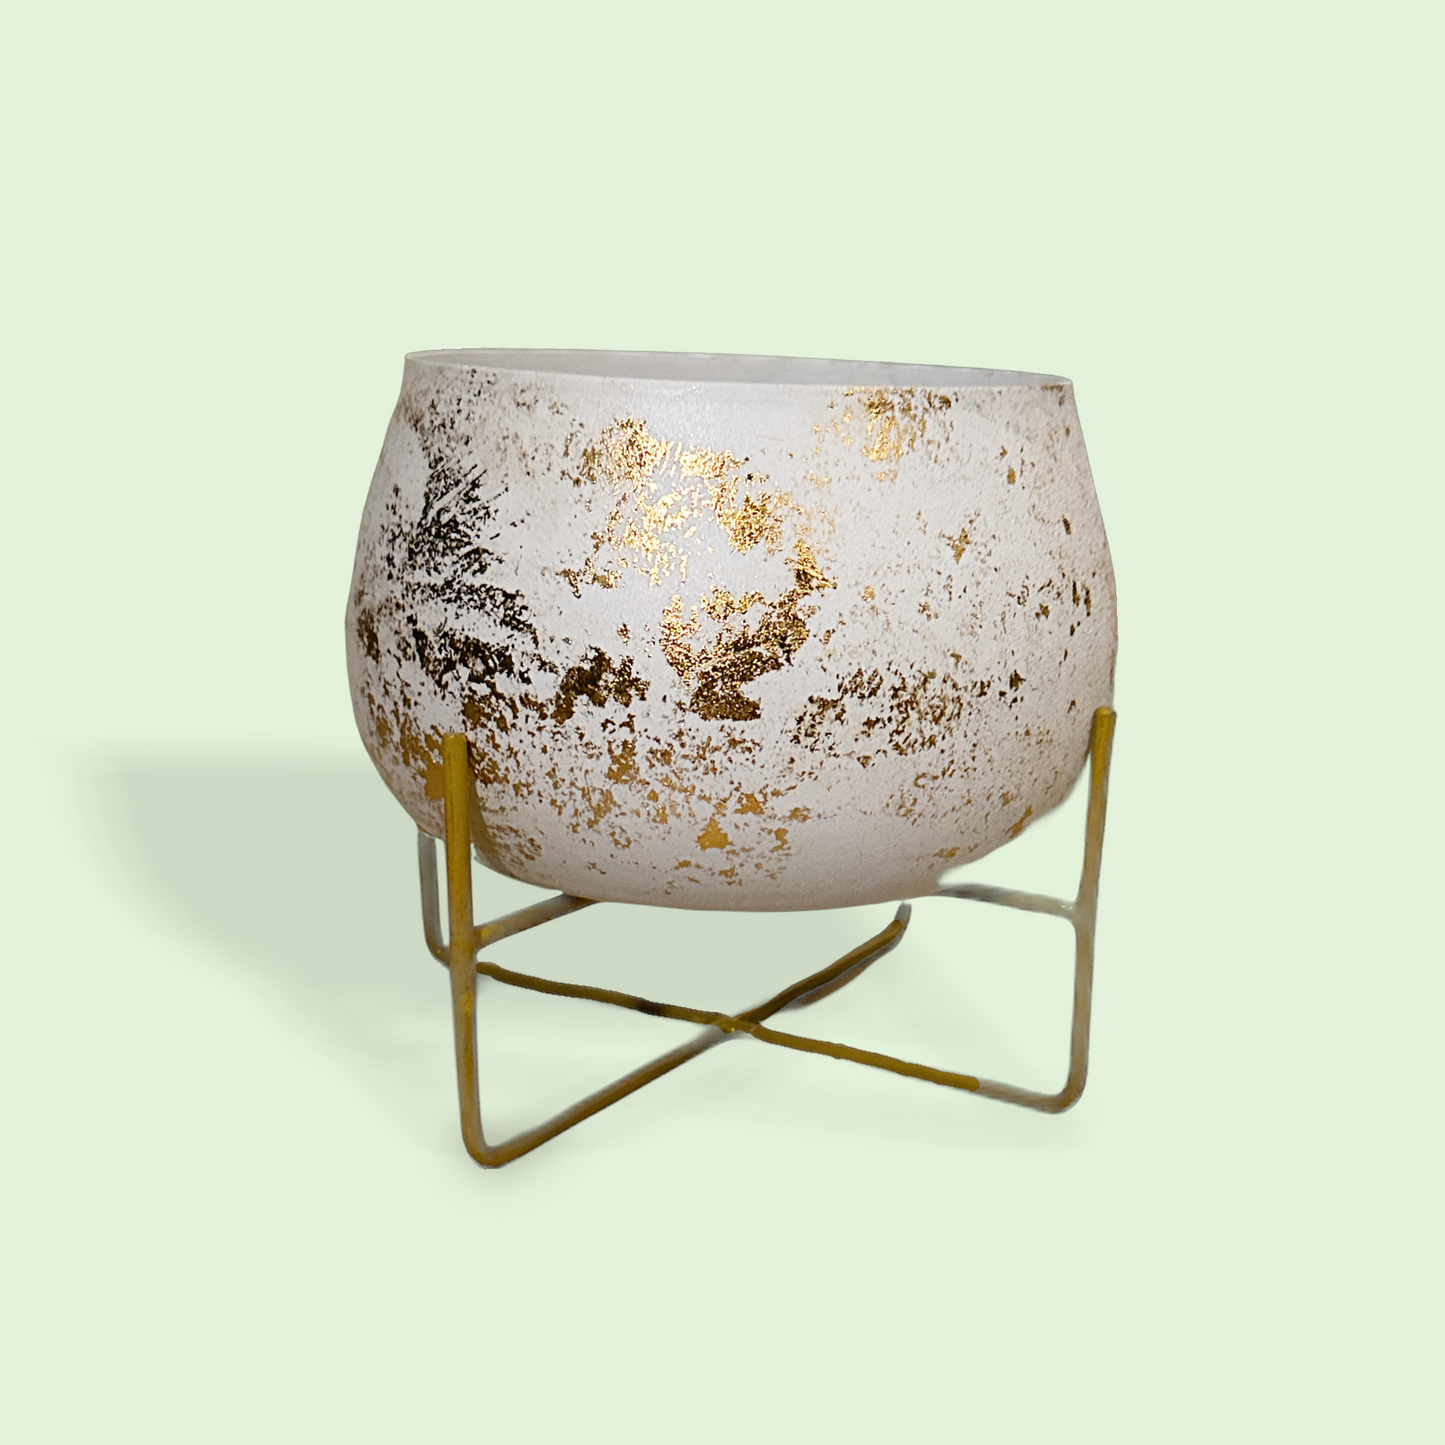 Big Powder coated Metal Pot with Stand | White with Golden finish